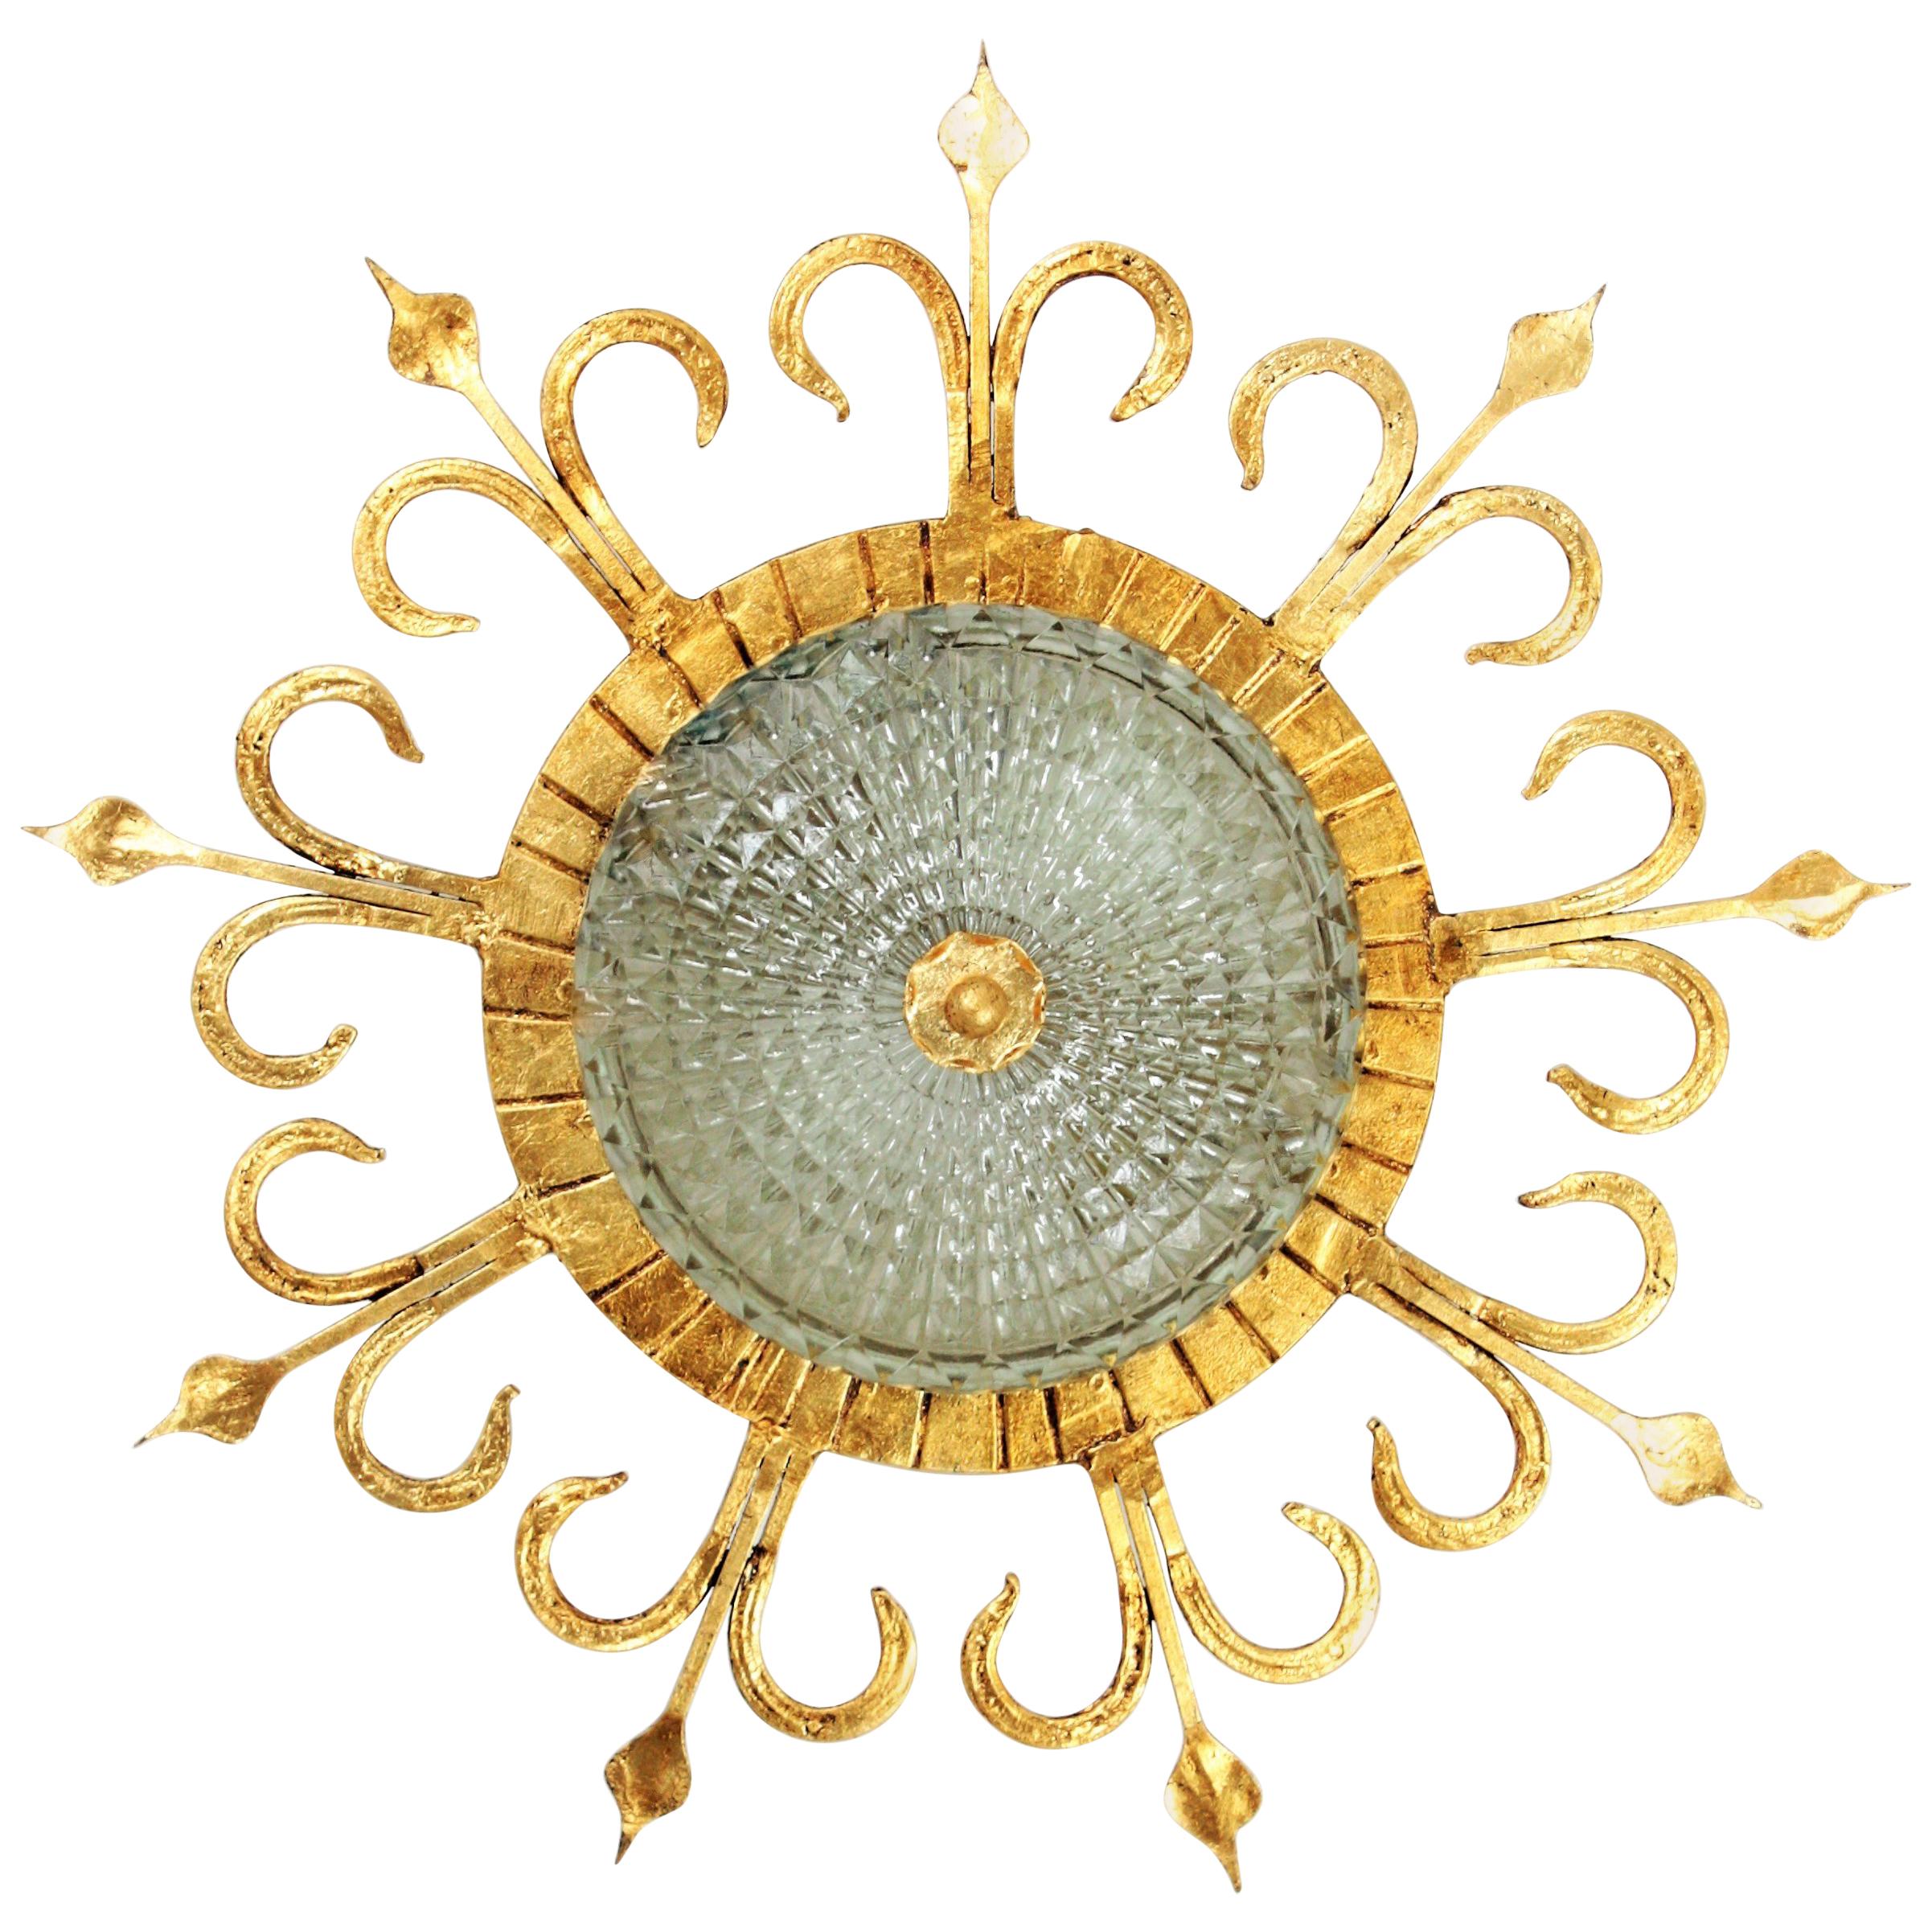 Spanish 1940s Neoclassical Gilt Iron and Glass Flush Mount Ceiling Light Fixture